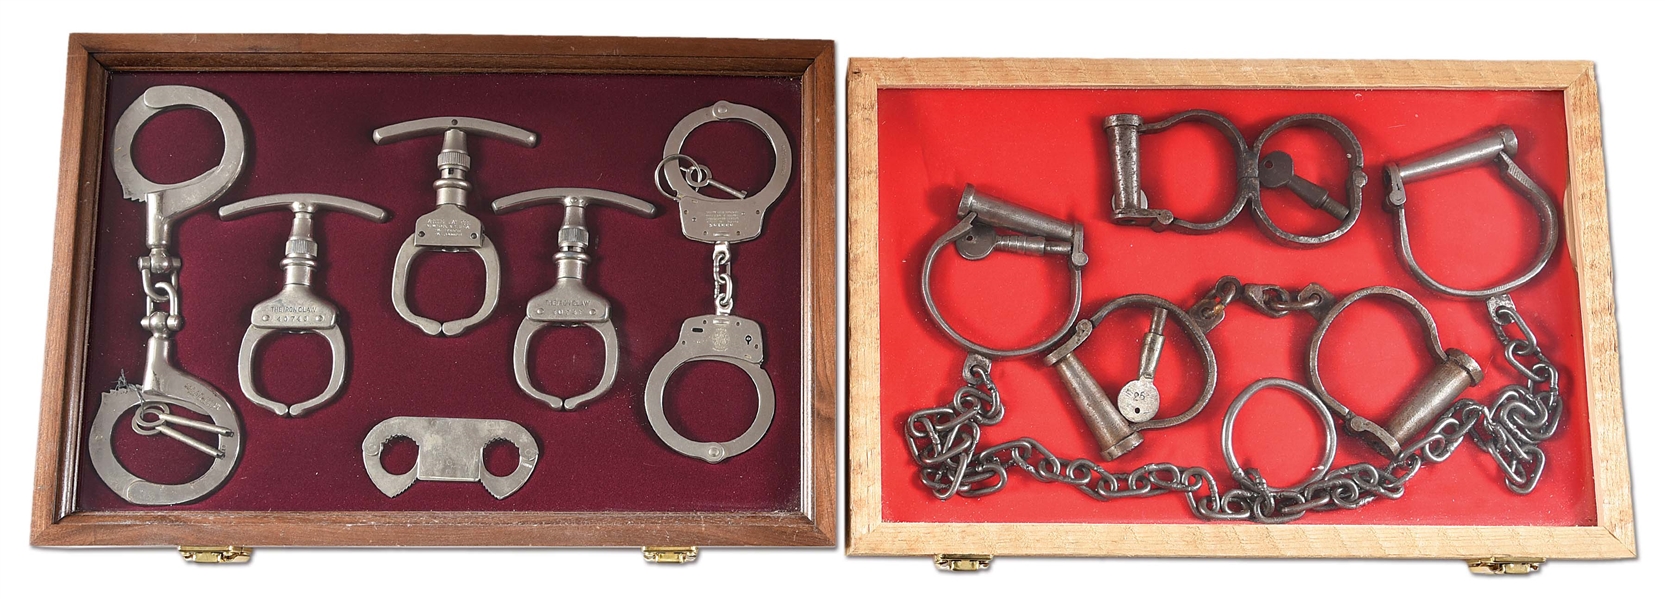 LOT OF 2: DISPLAYS OF VINTAGE HANDCUFFS AND RESTRAINTS.